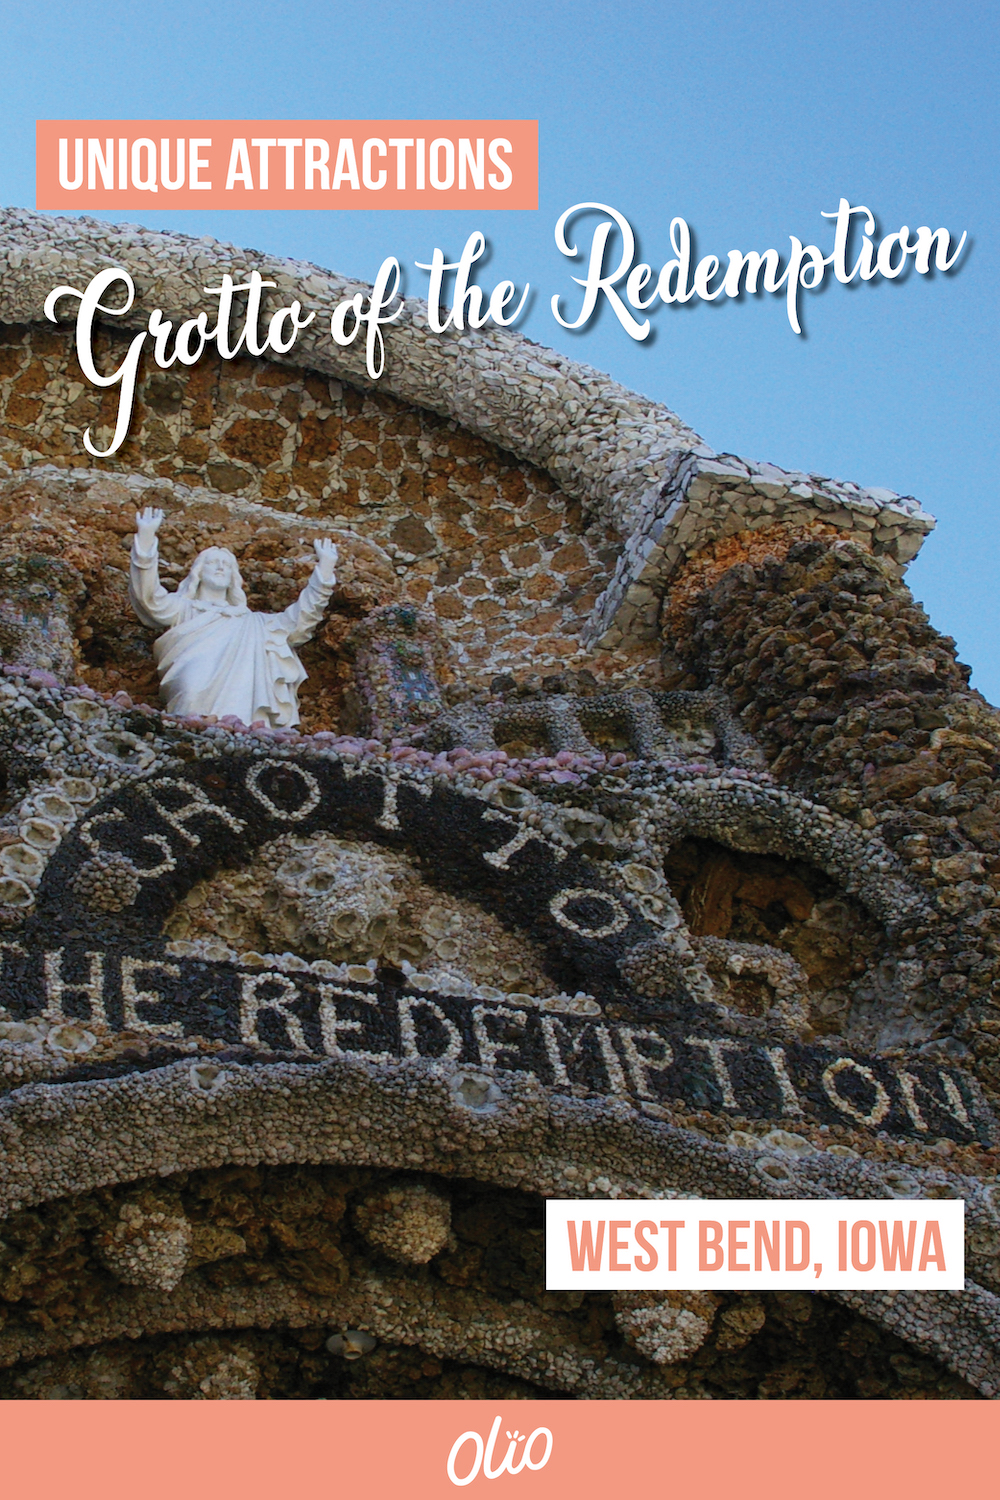 Located in West Bend, Iowa, the Grotto of the Redemption has been referred to as the eighth wonder of the world. This unique attraction is constructed with an estimated $4.3 million in stones and precious gems. Construction on the grotto began in 1912 and today it is listed on the National Register of Historic Places, attracting more than 100,000 visitors every year. #Iowa #RoadsideAttractions